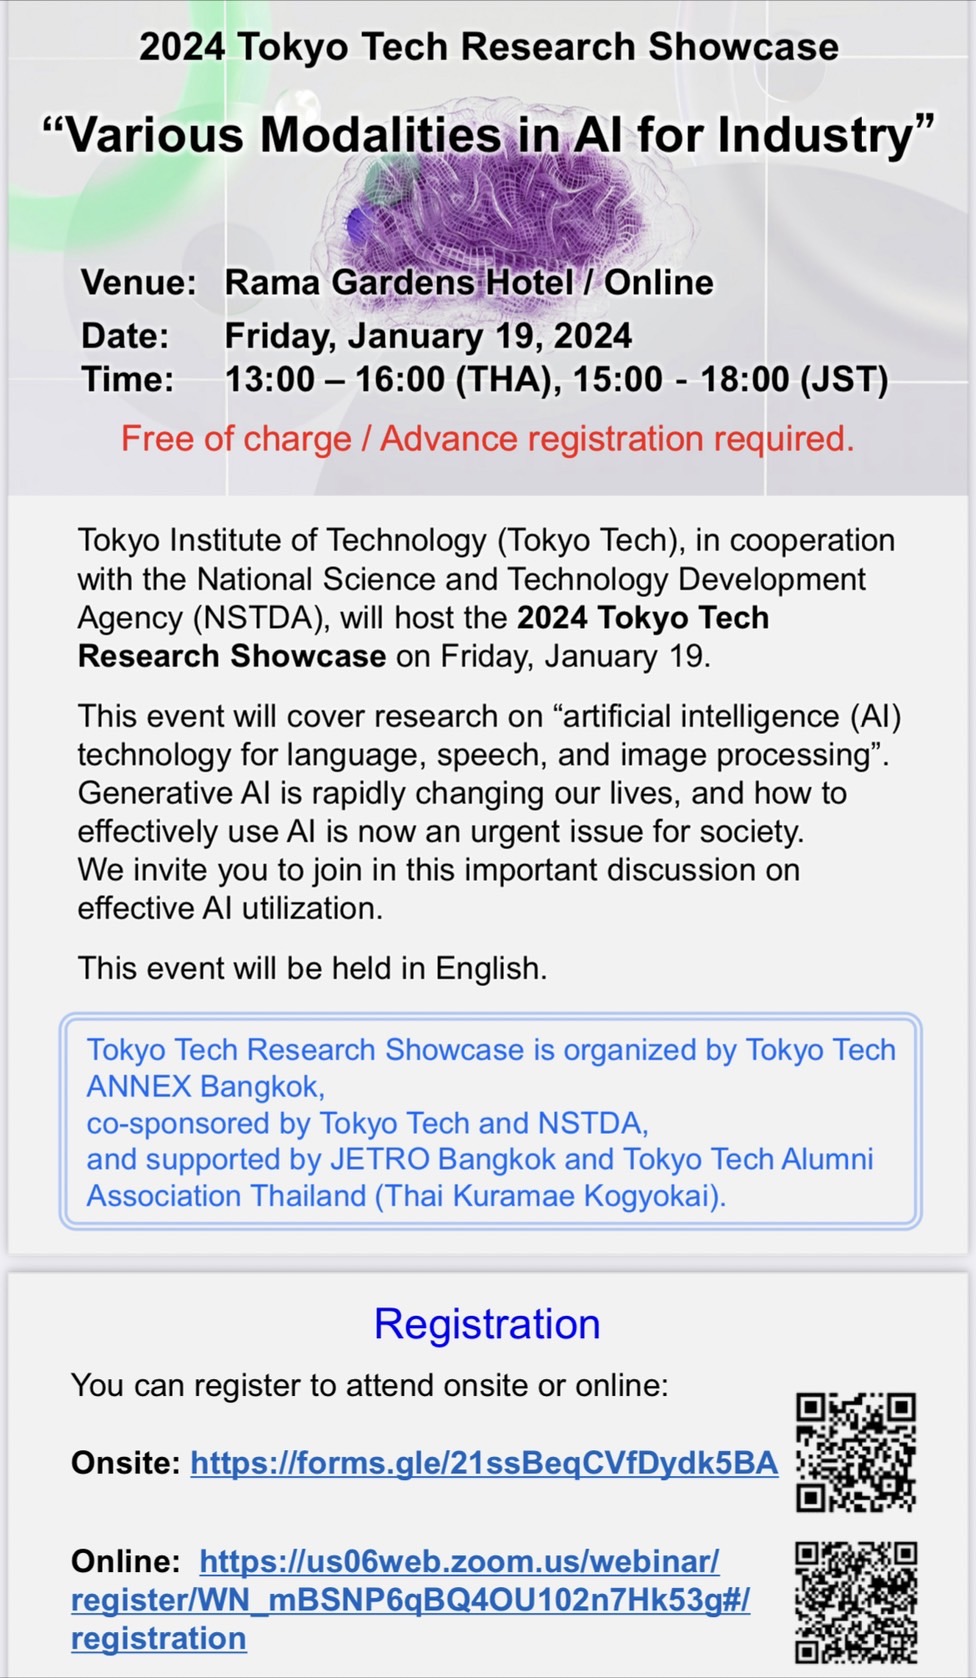 Free Hybrid Seminar 2024 Toyko Tech Research Showcase “Various Modalities in AI for Industry”